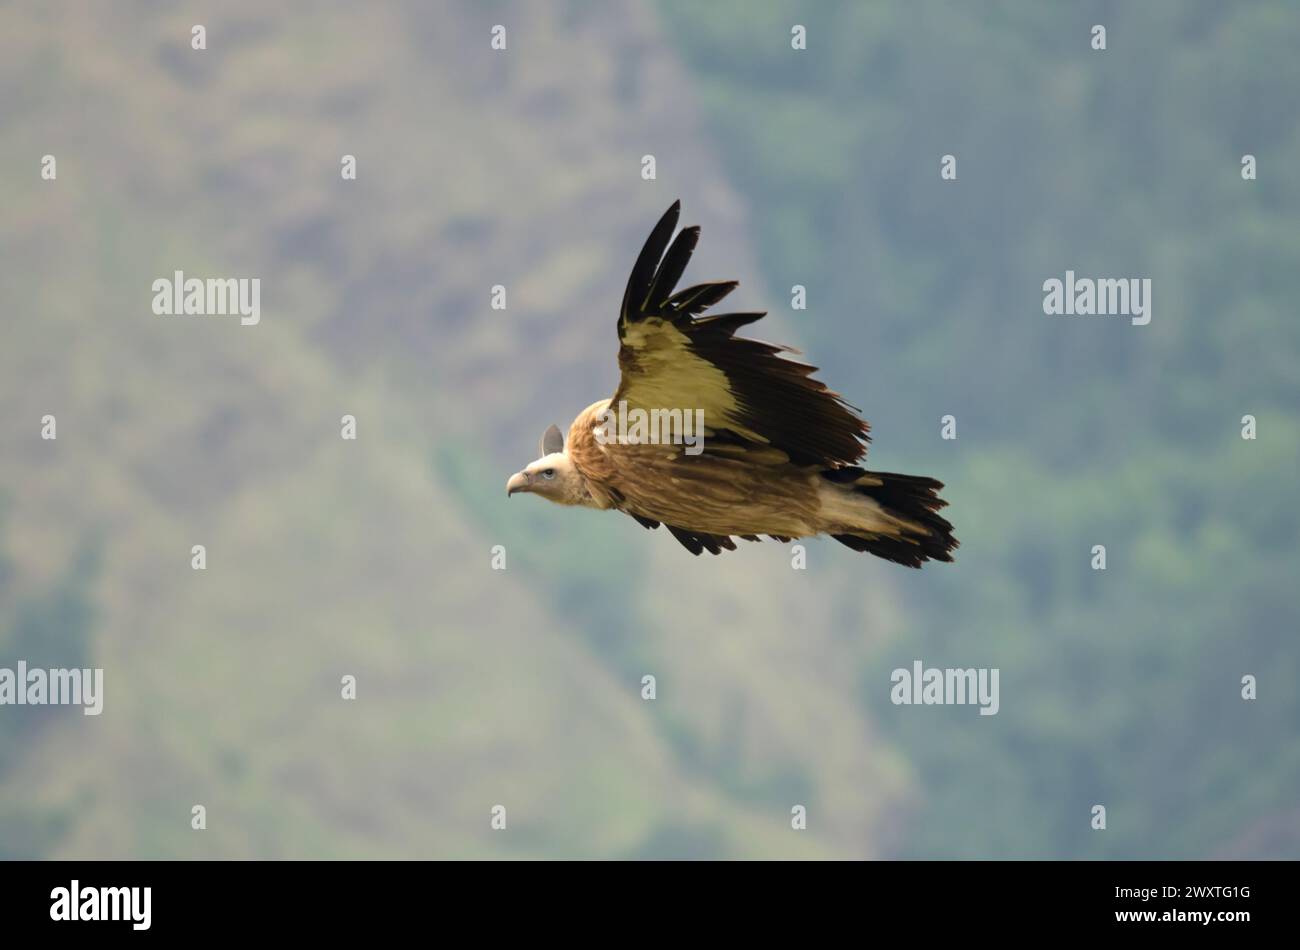 Himalayan vulture (Gyps himalayensis) or Himalayan griffon vulture, an Old World vulture, observed in flight in Auli in Uttarakhand, India Stock Photo